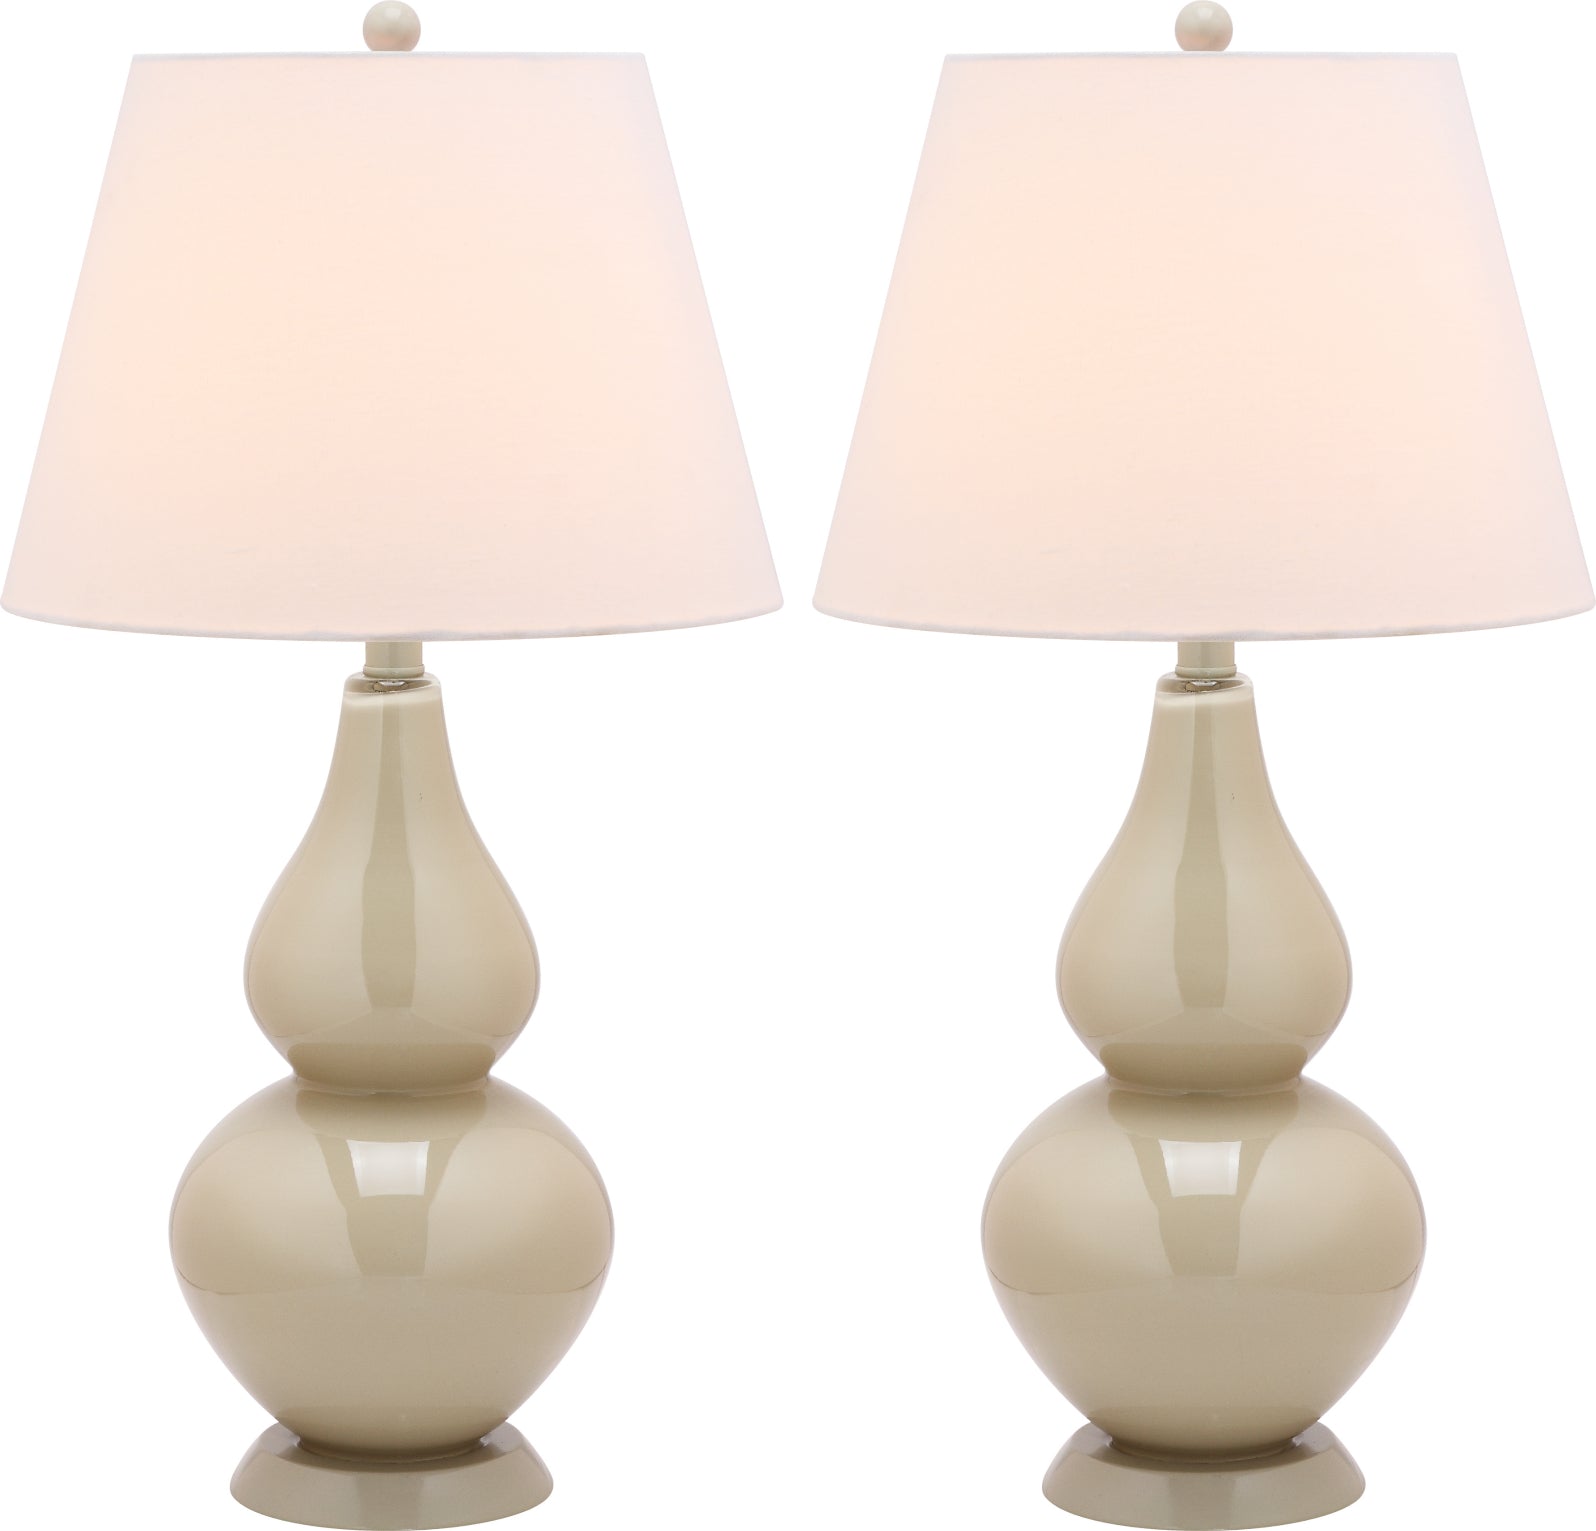 Safavieh Cybil 26-Inch H Double Gourd Lamp Taupe main image